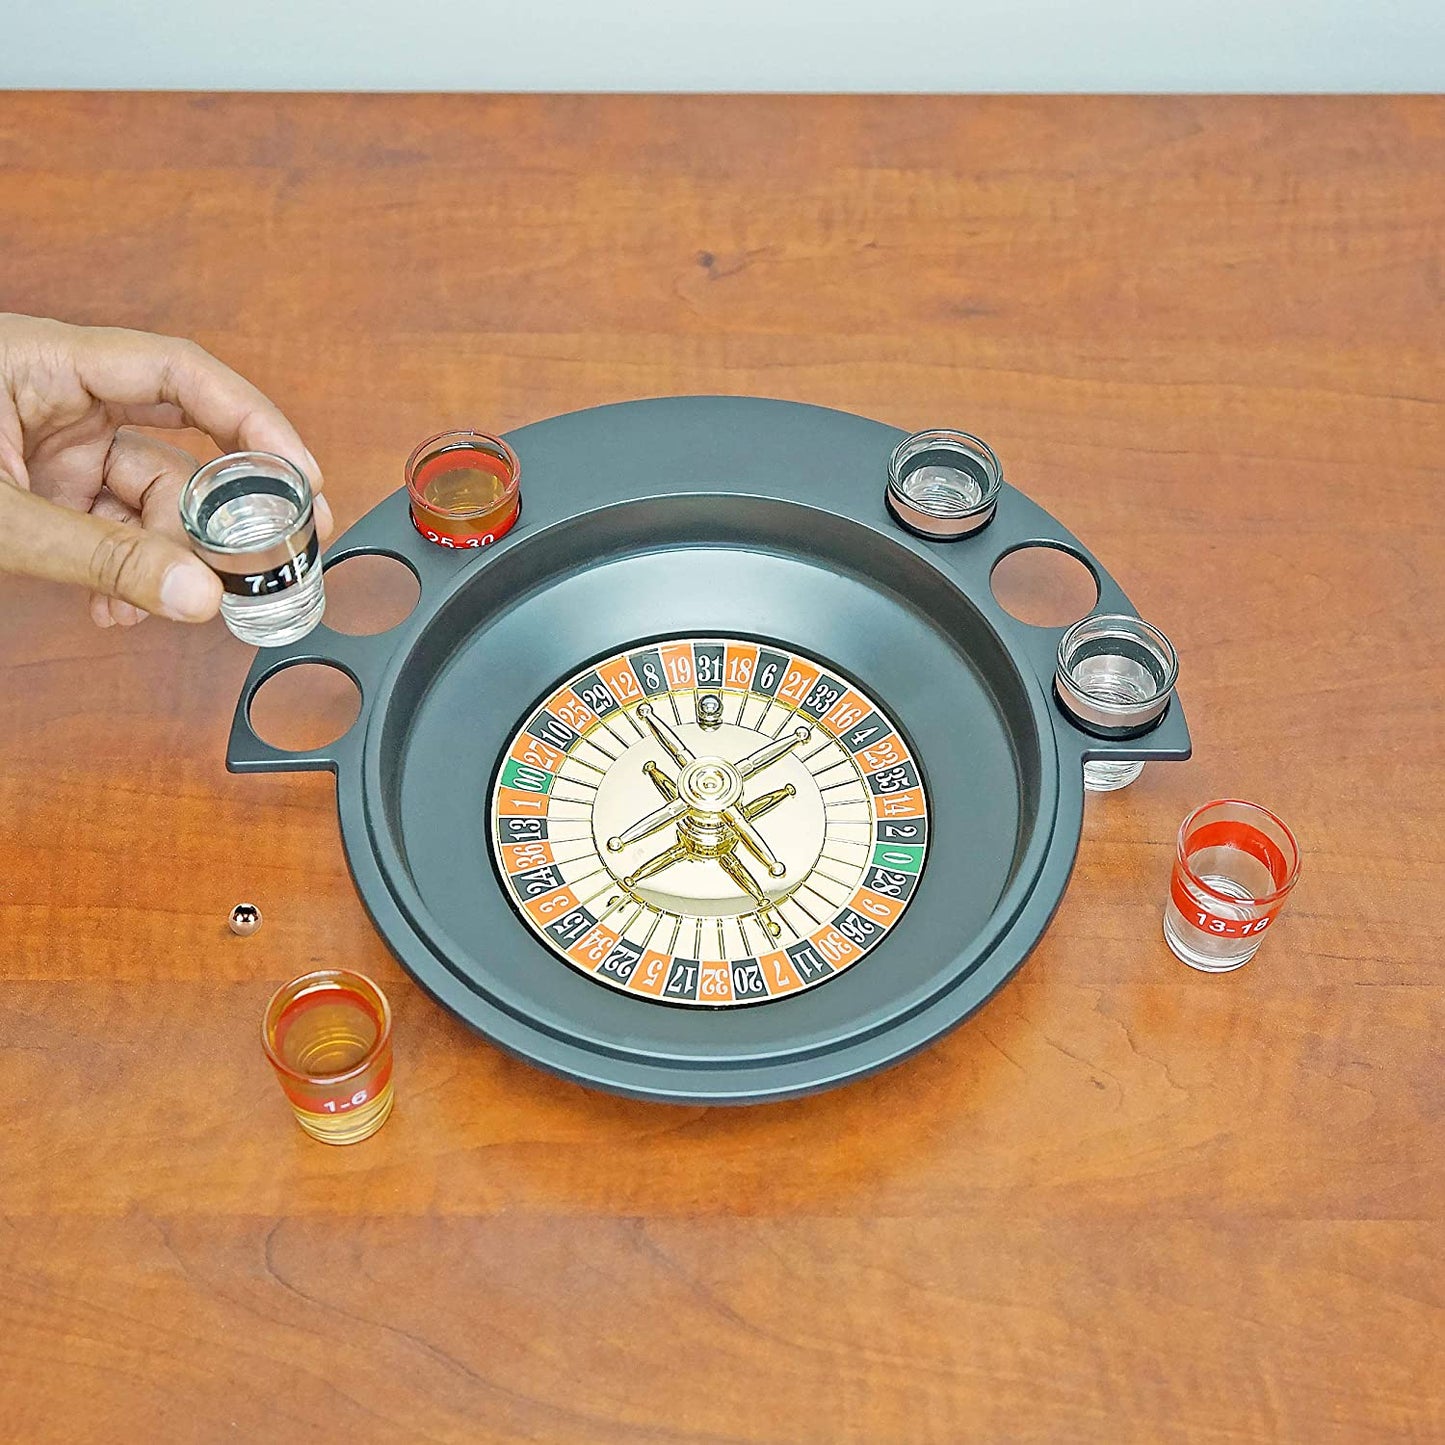 Shot Glass Roulette Drinking Game Set with 2 Balls and 6 Shot Glasses